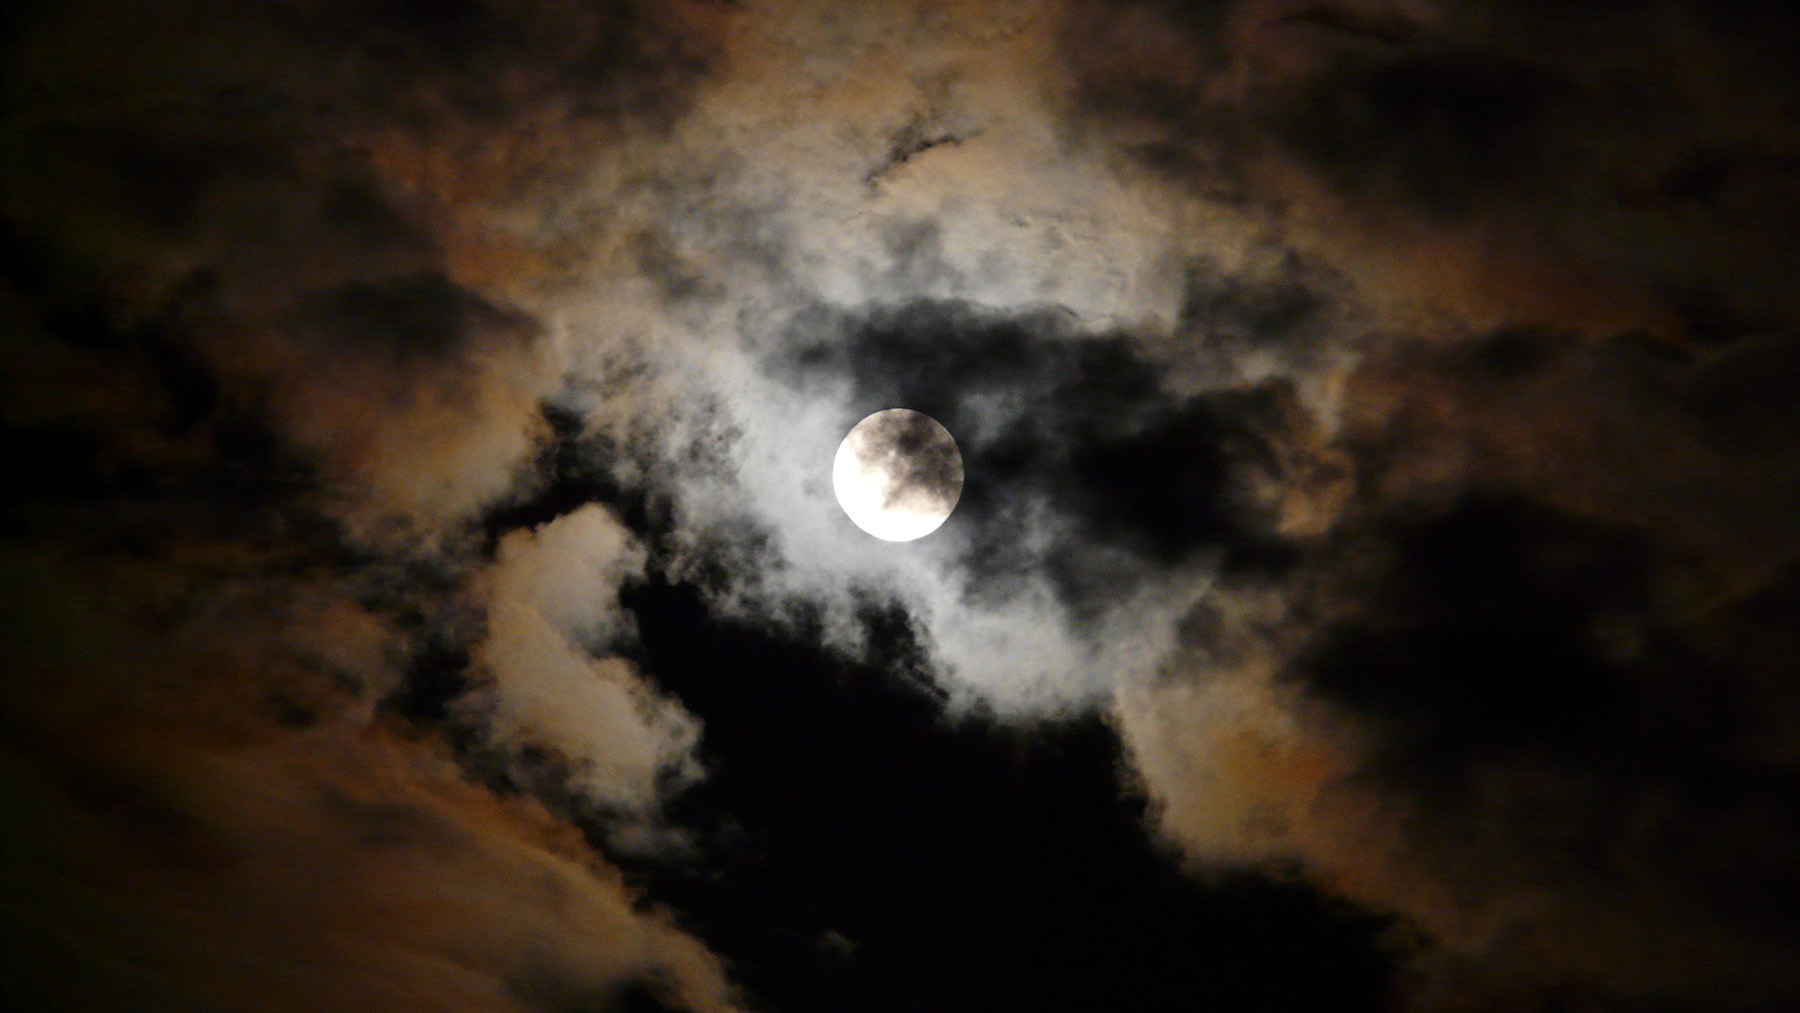 Stock photo of clouds moving across the night sky in front of a full moon (Creative Commons photo)